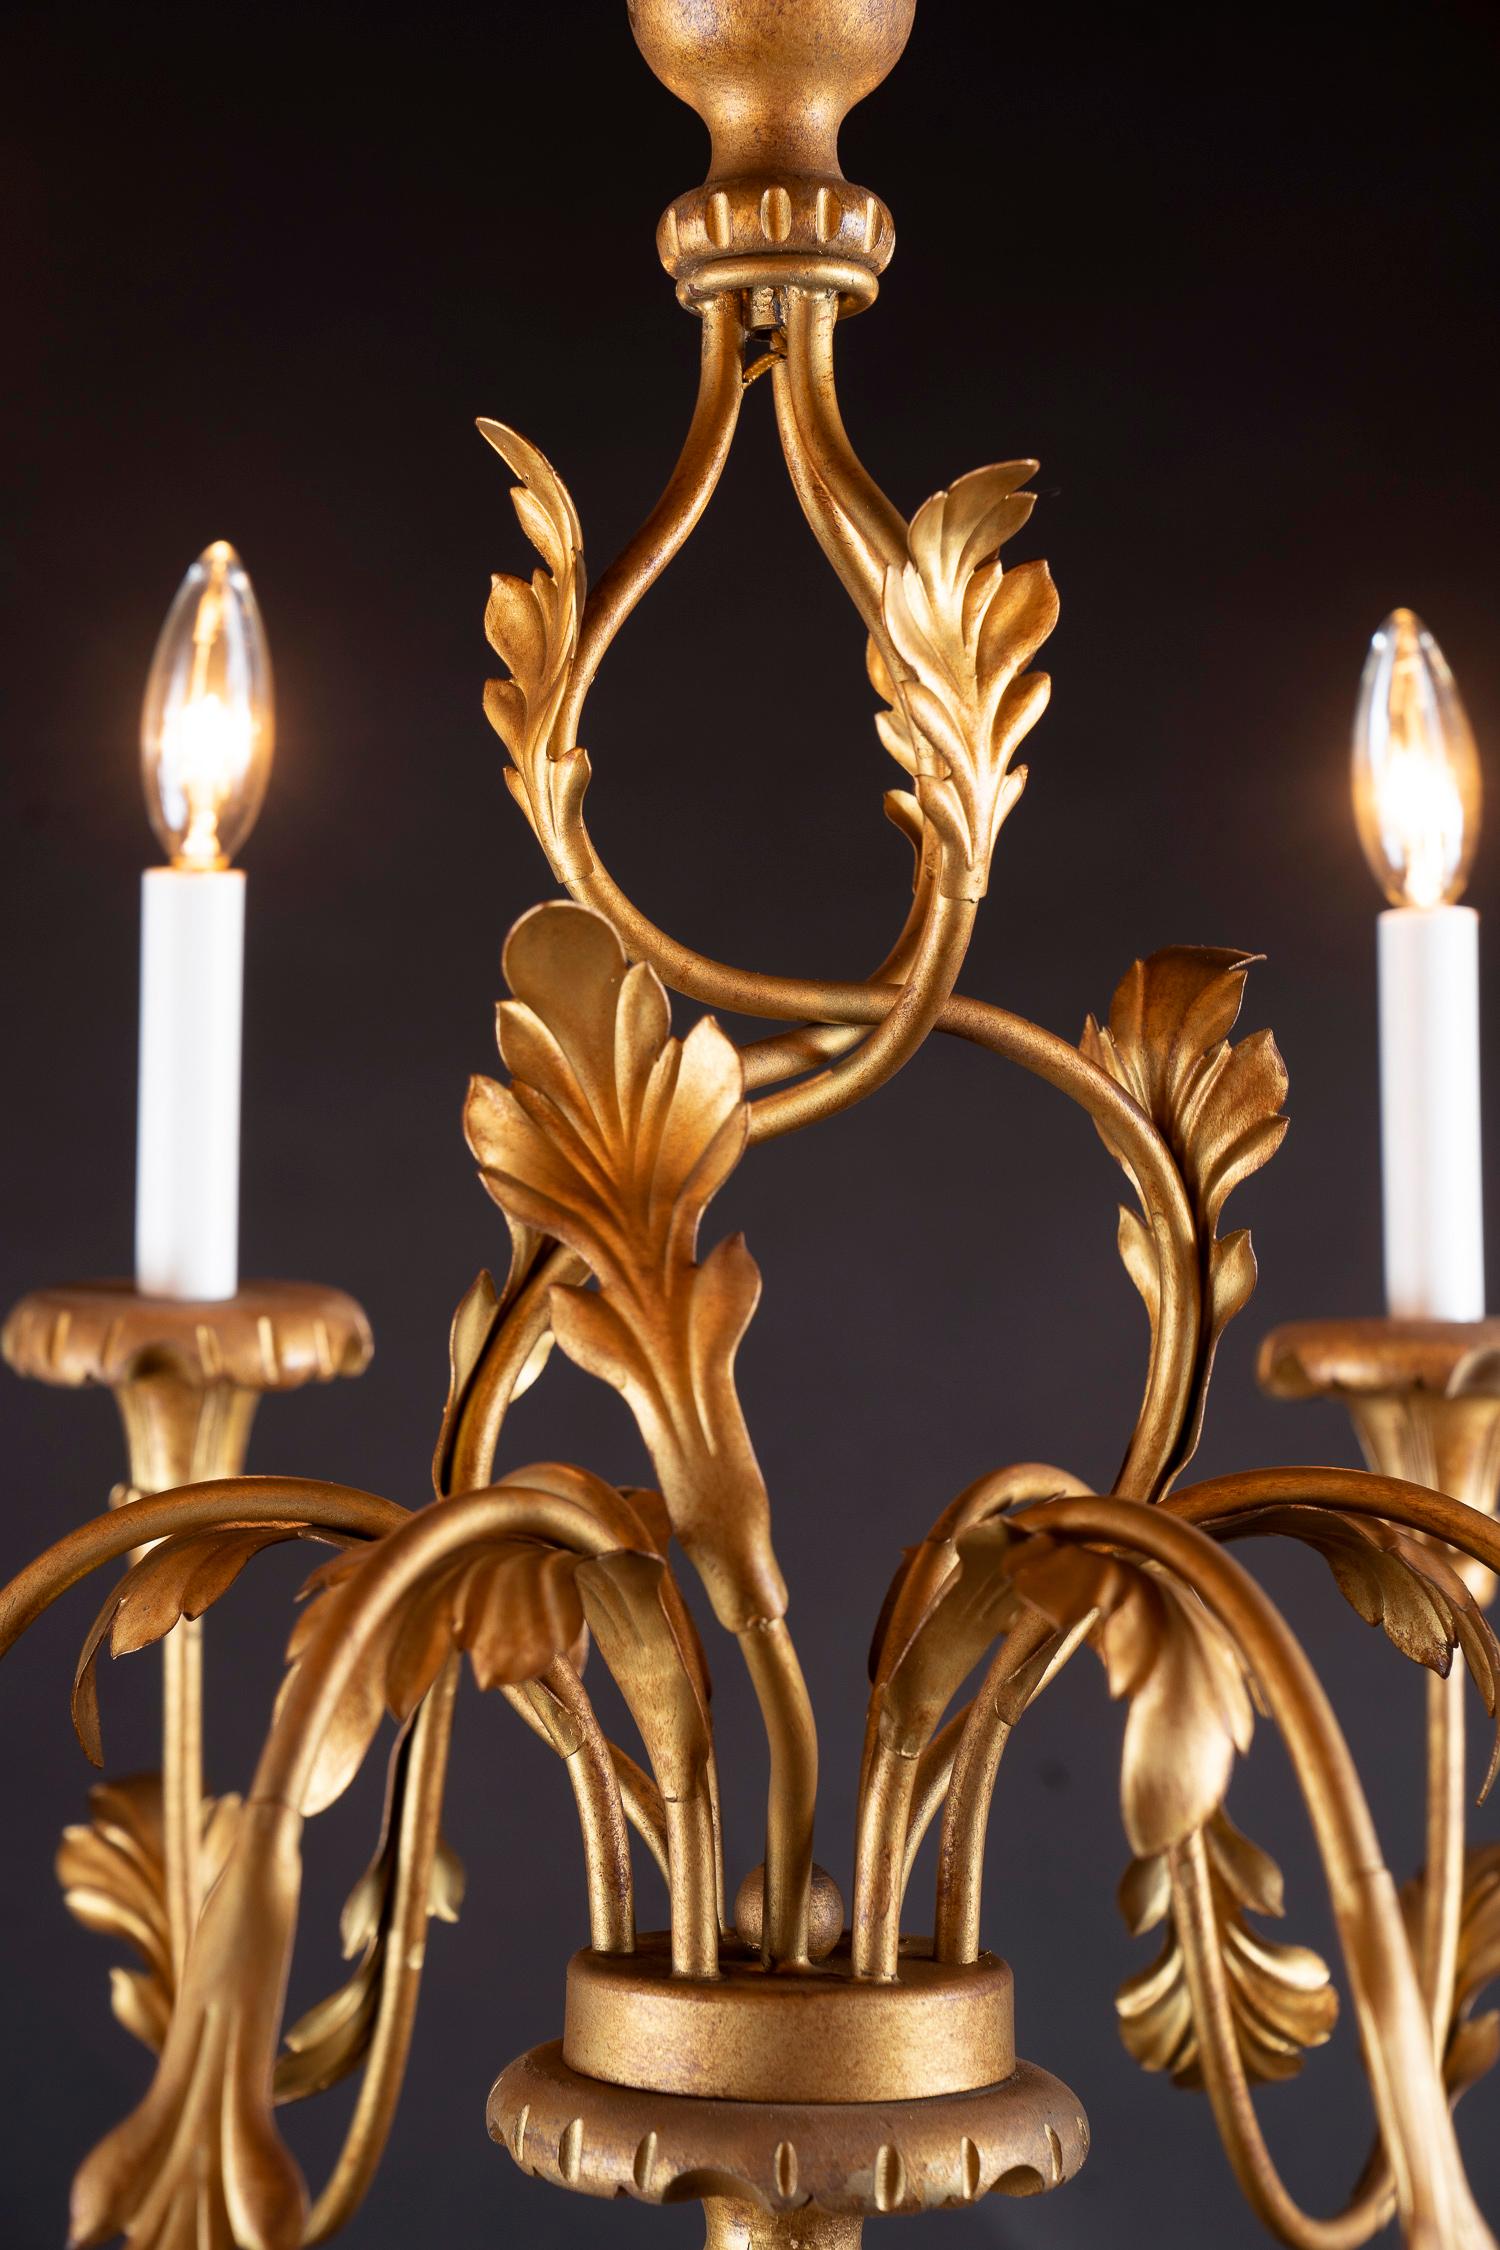 This beautiful Italian chandelier is made of gilded (gold leaf covered) Iron, hand painted wood, and tole. The piece dates back to the mid-20th century and features a lovely spiral aesthetic along its center stem. Decorative furling leaves drape